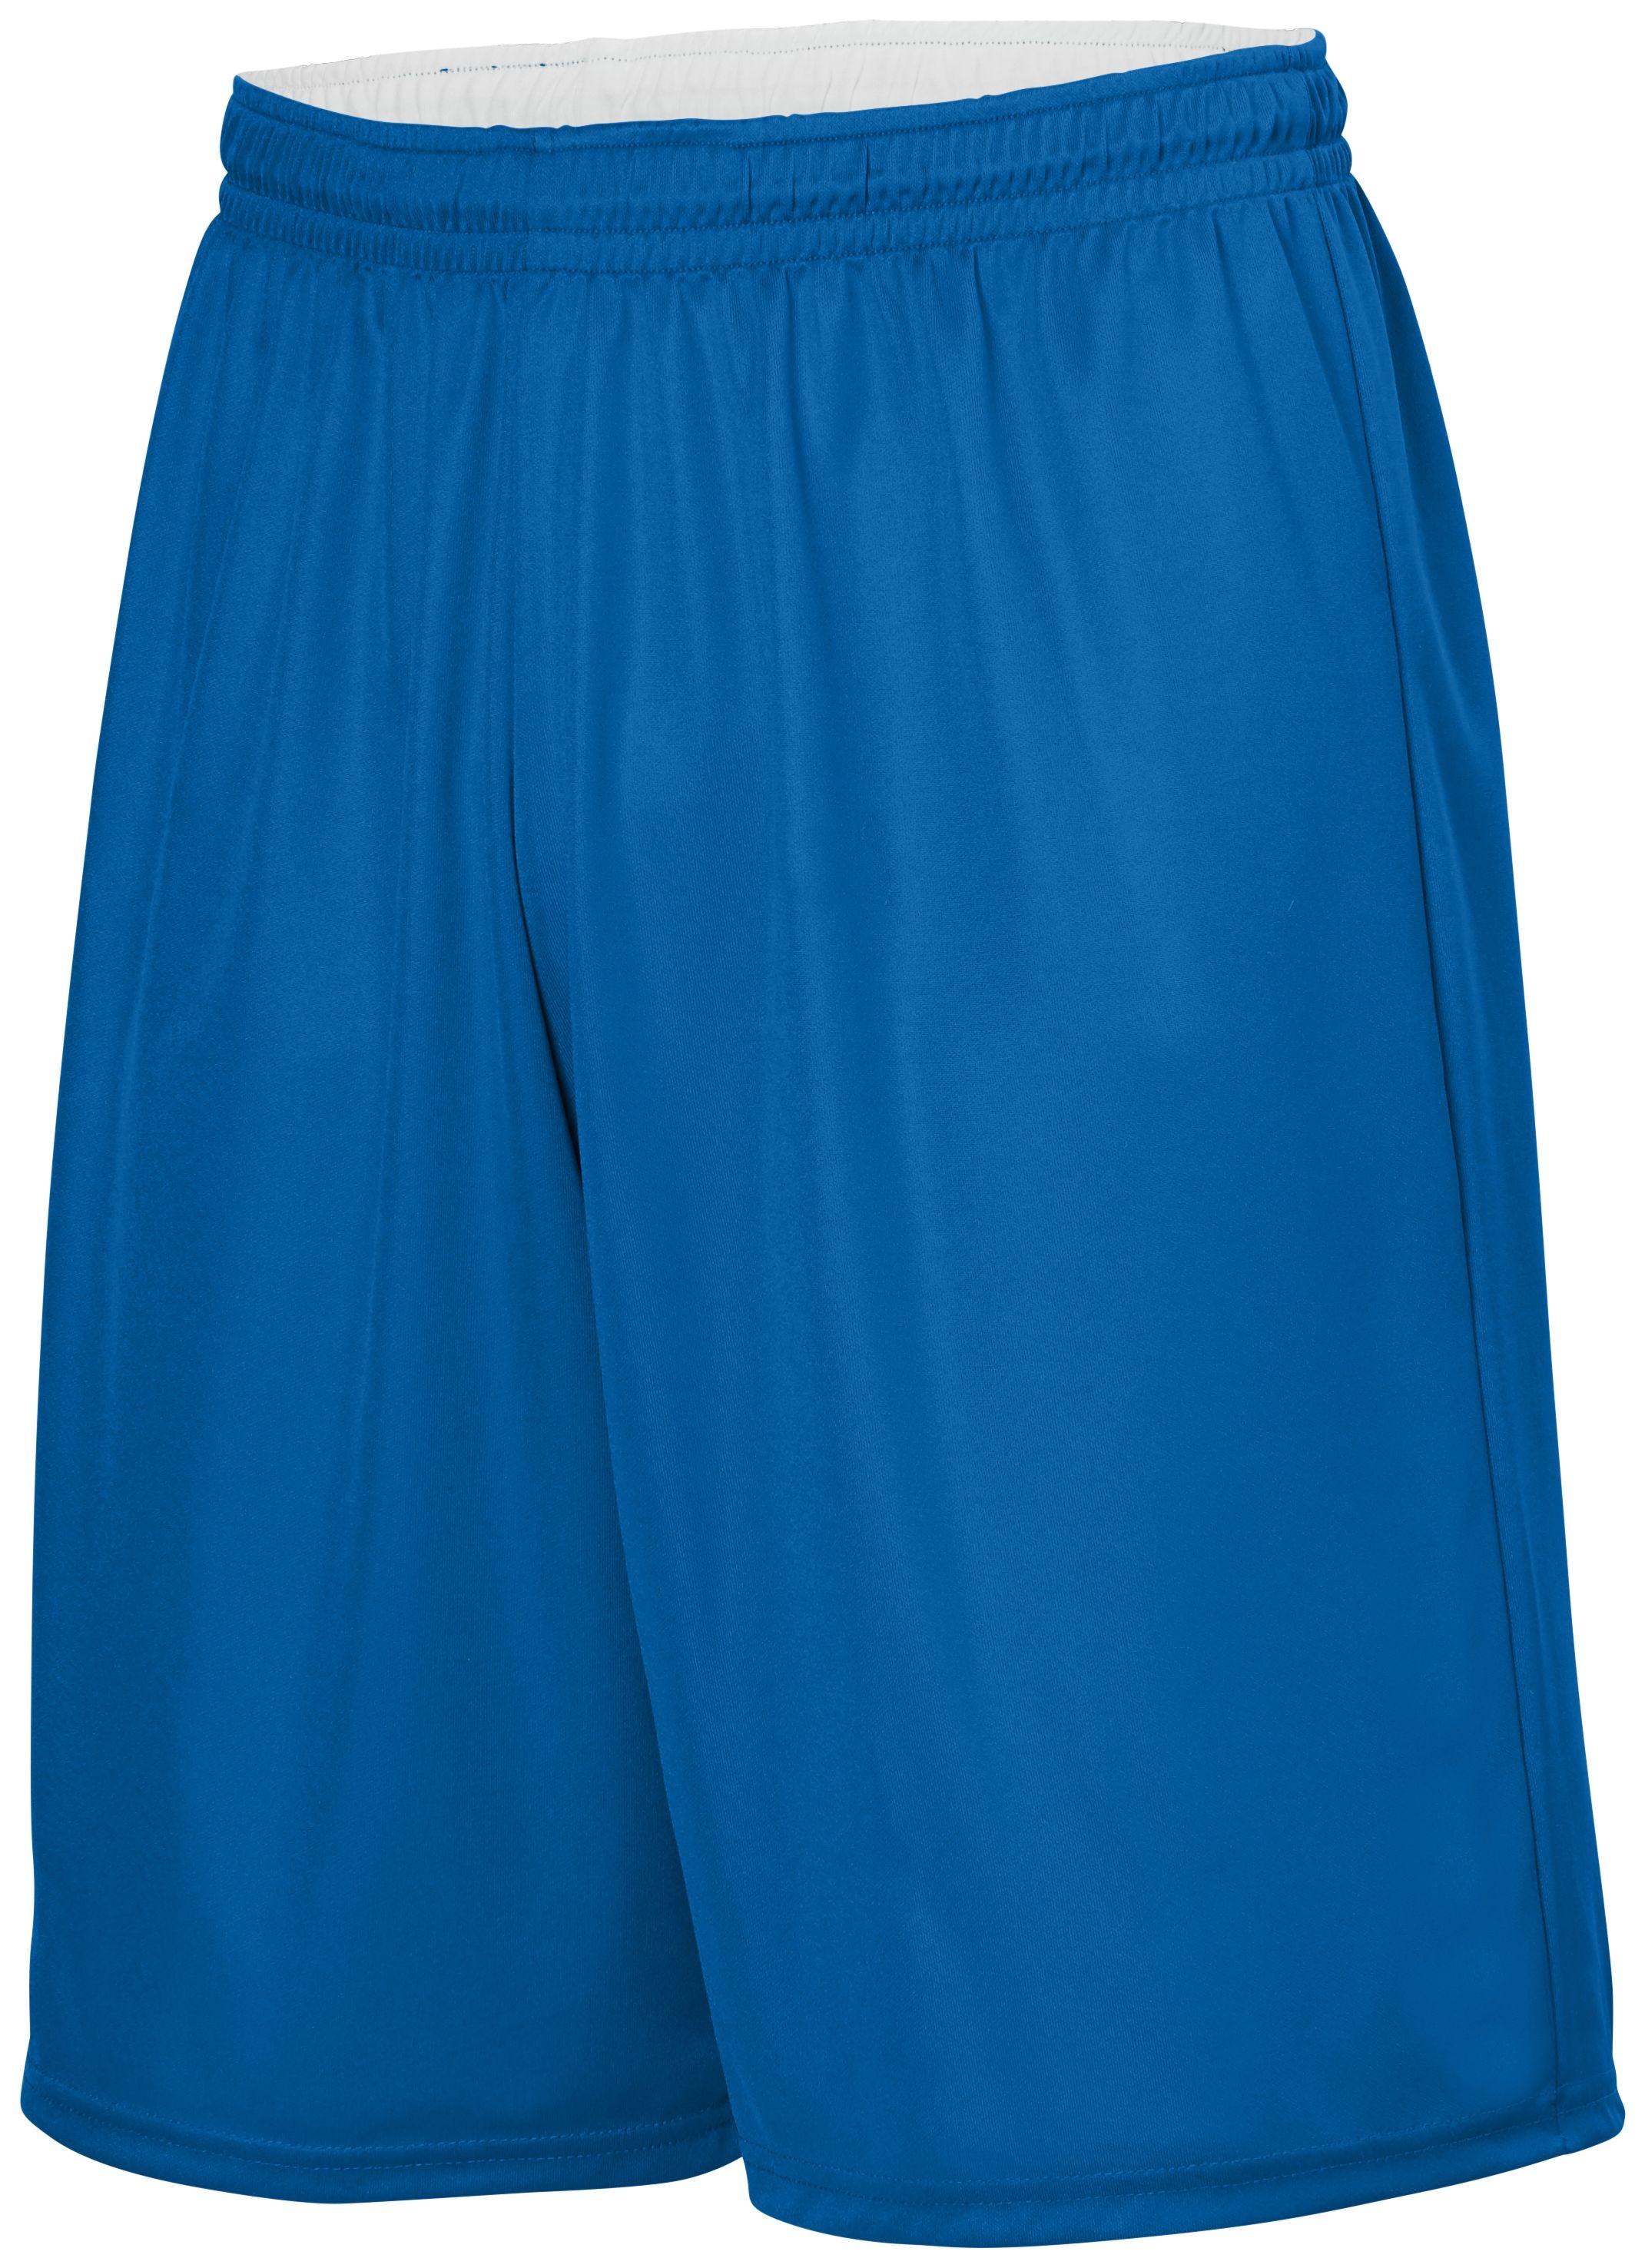 Augusta Sportswear Reversible Wicking Shorts in Royal/White  -Part of the Adult, Adult-Shorts, Augusta-Products, Basketball, All-Sports, All-Sports-1 product lines at KanaleyCreations.com